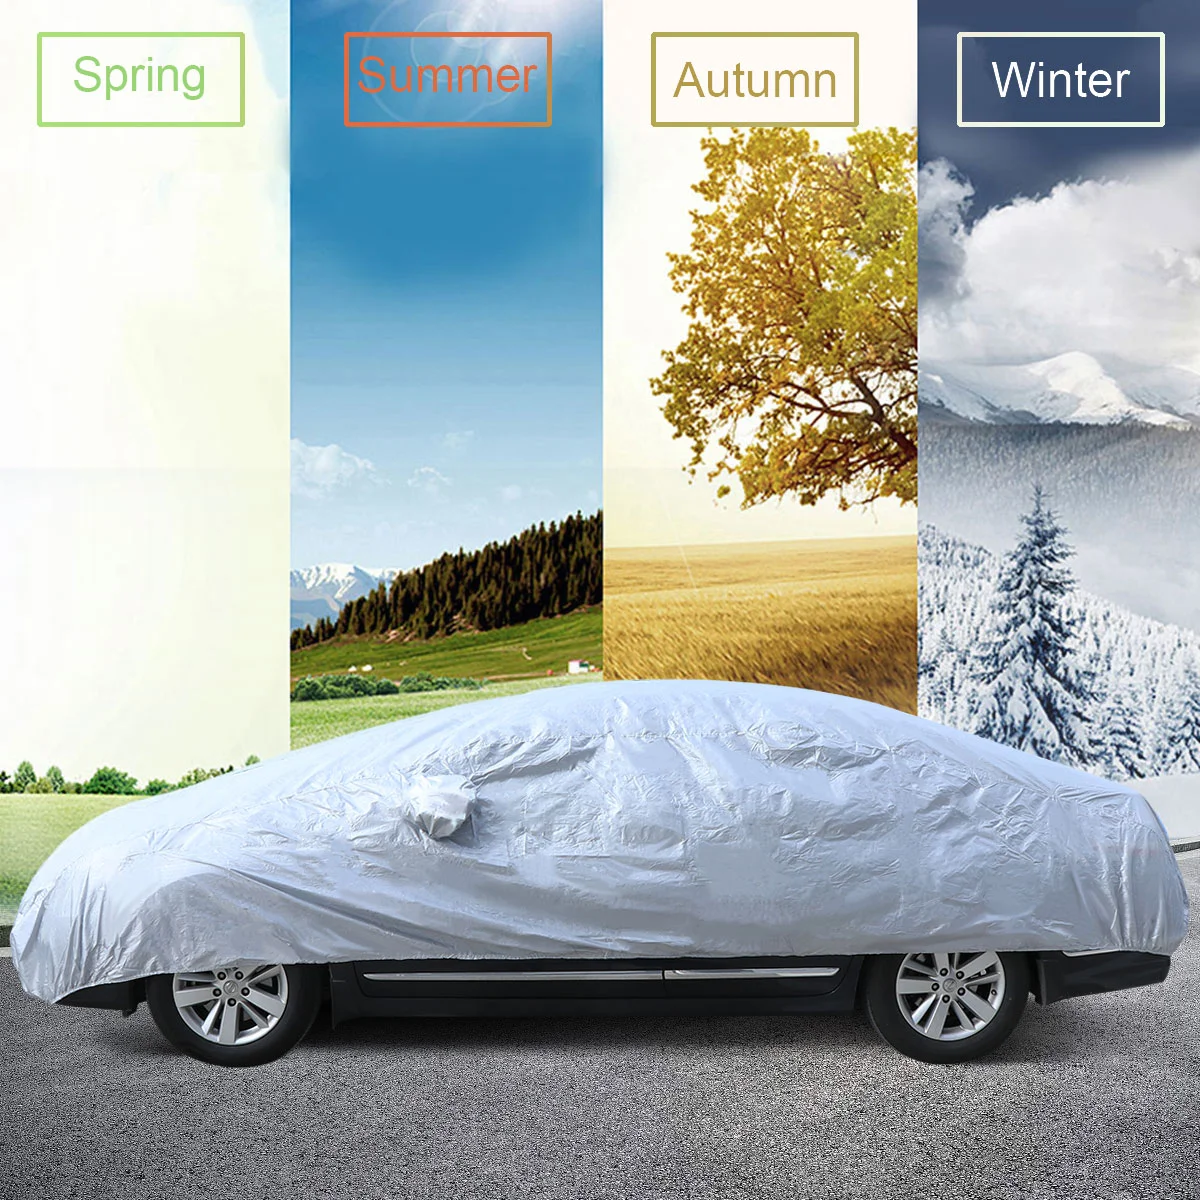 

Car Front Wndow Cover/Full Cover Sun Shade Protector Outdoor Wind Dust Snow Rain Protective Cover Auto Accessories Styling